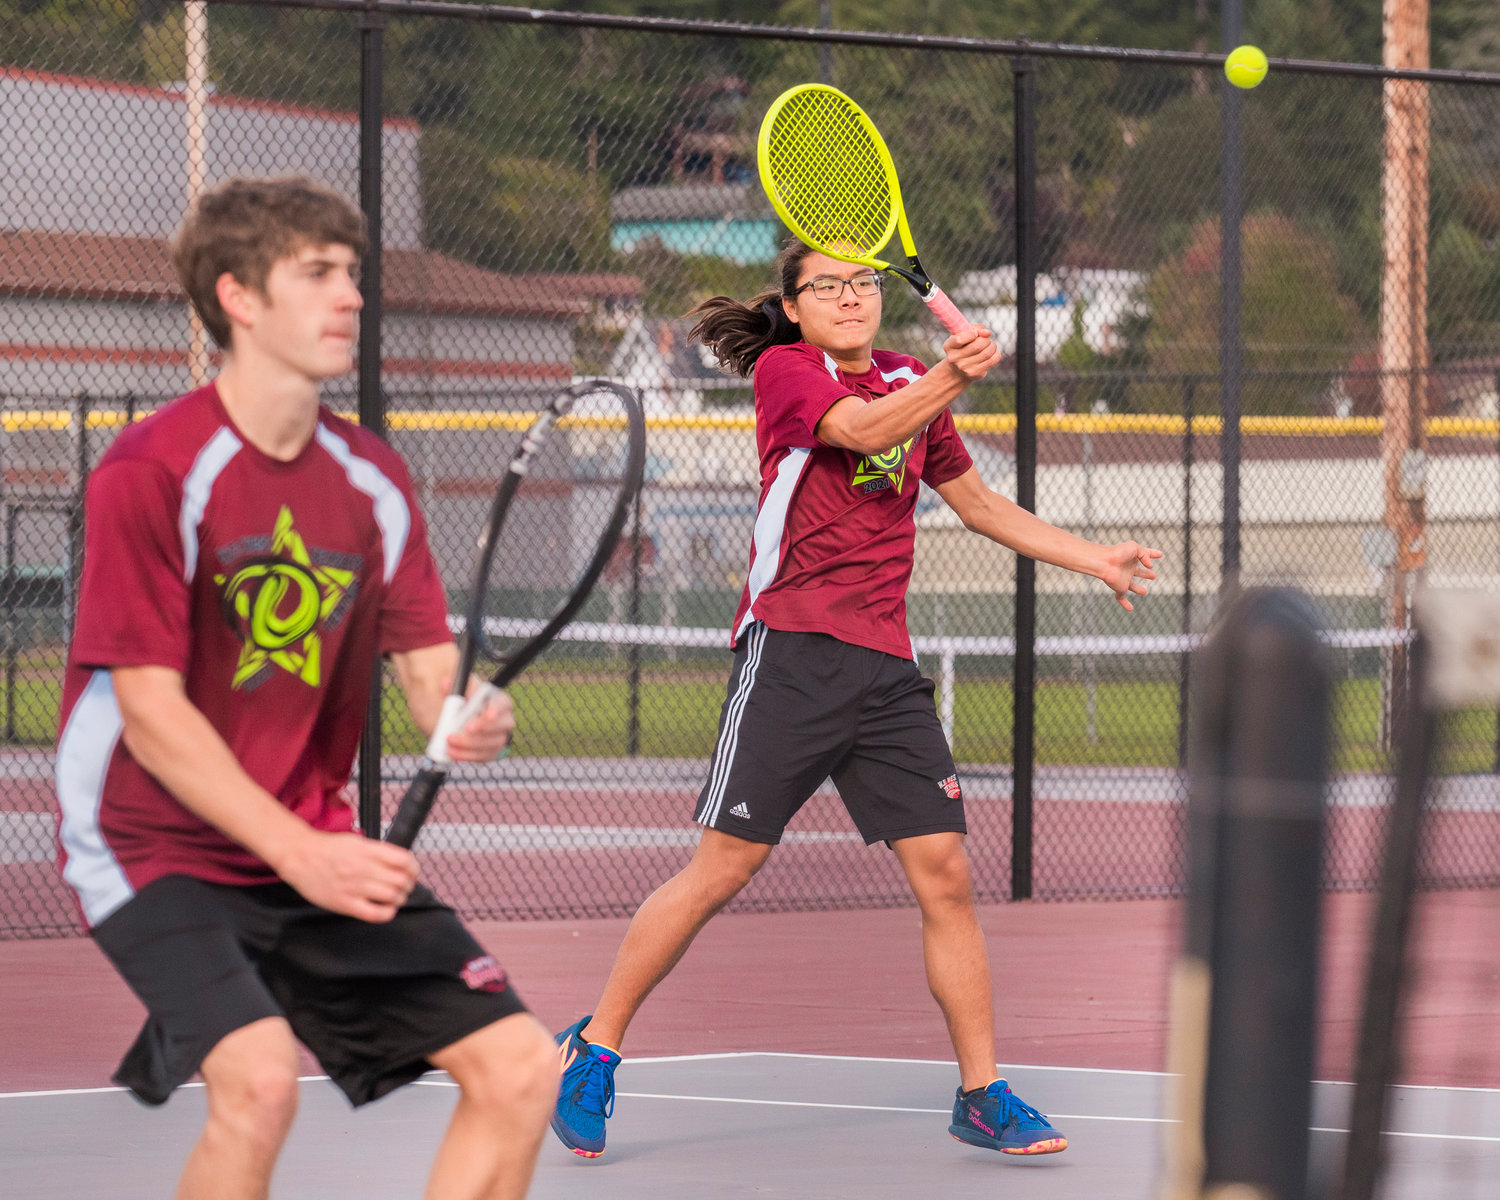 W.F. West’s Joseph Chung returns a ball during a doubles match with Aaron Boggess in Chehalis Wednesday afternoon.